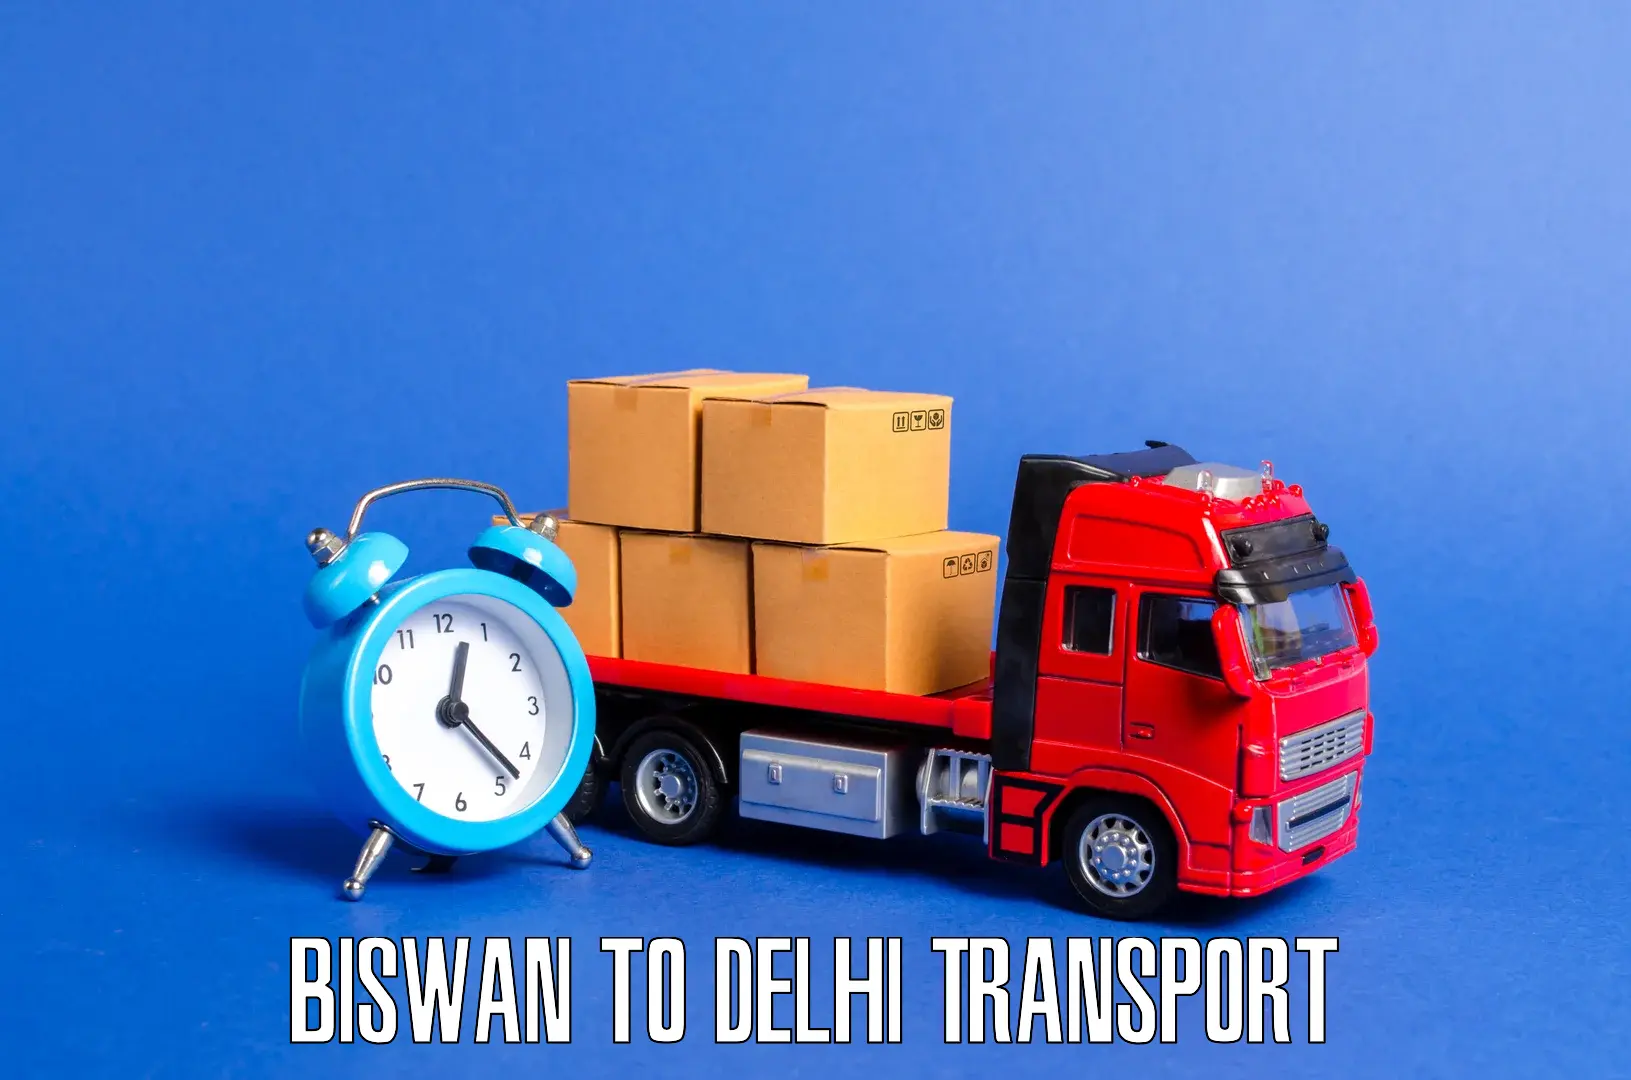 Cargo train transport services Biswan to Lodhi Road